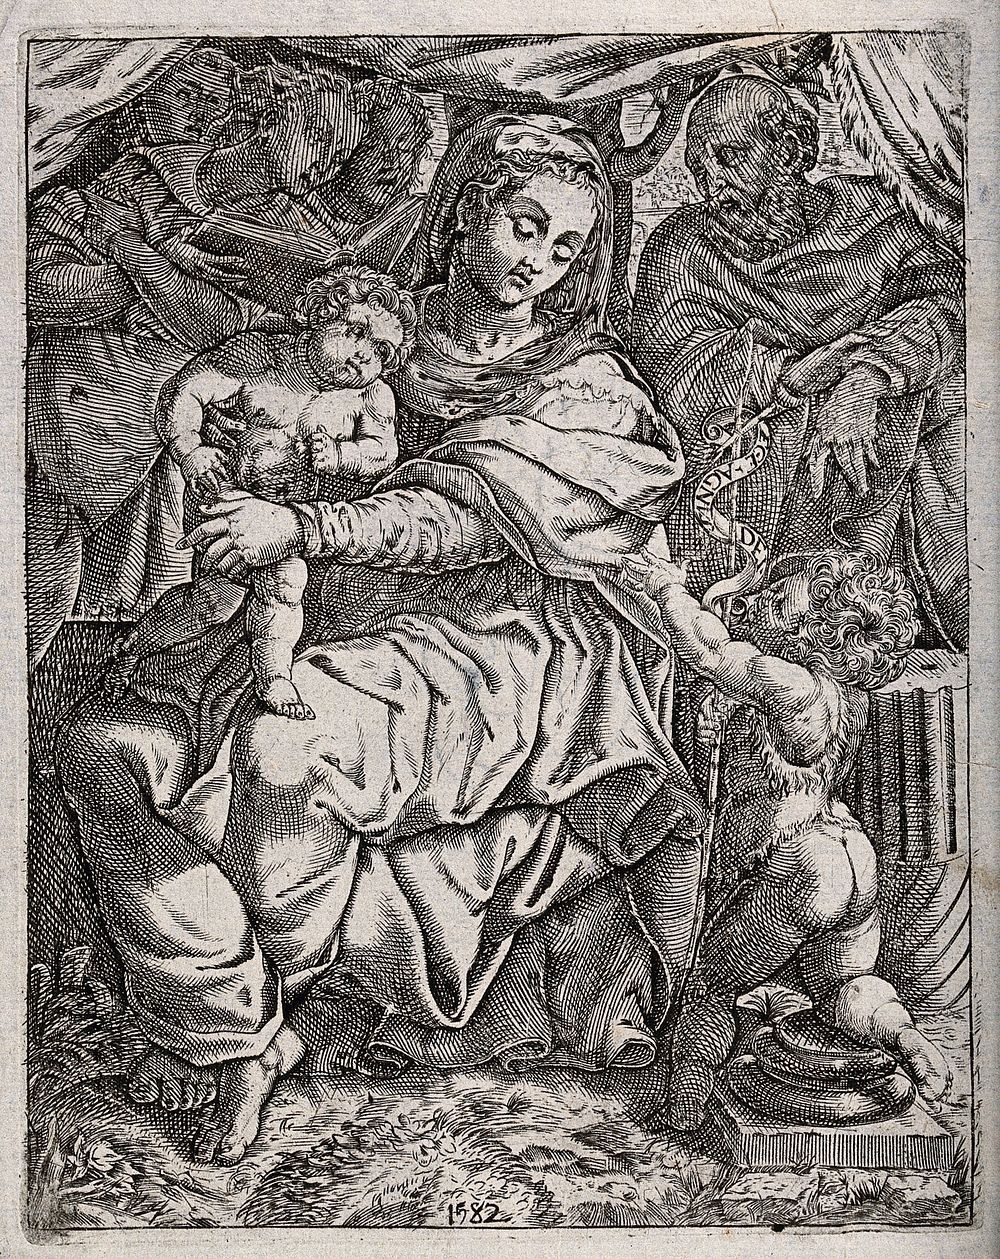 Saint Mary (the Blessed Virgin) and Saint Joseph with the Christ Child, Saint John the Baptist and angels. Engraving, 1582.